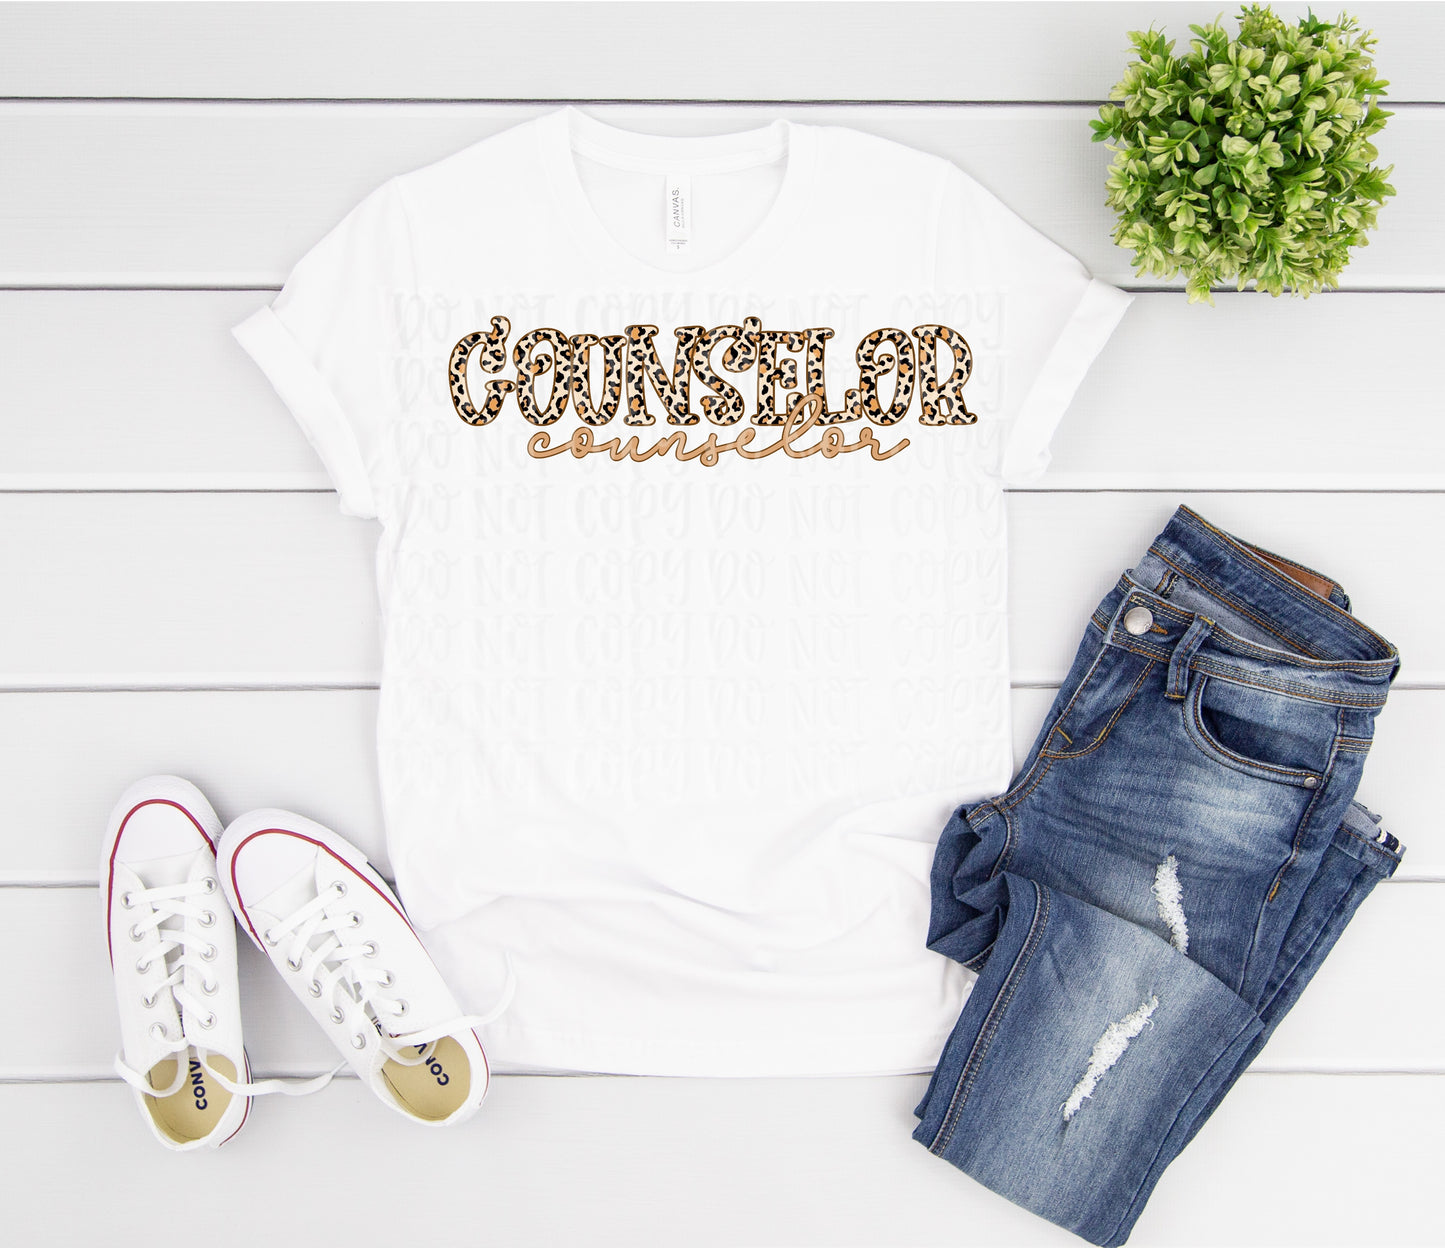 Counselor-leopard